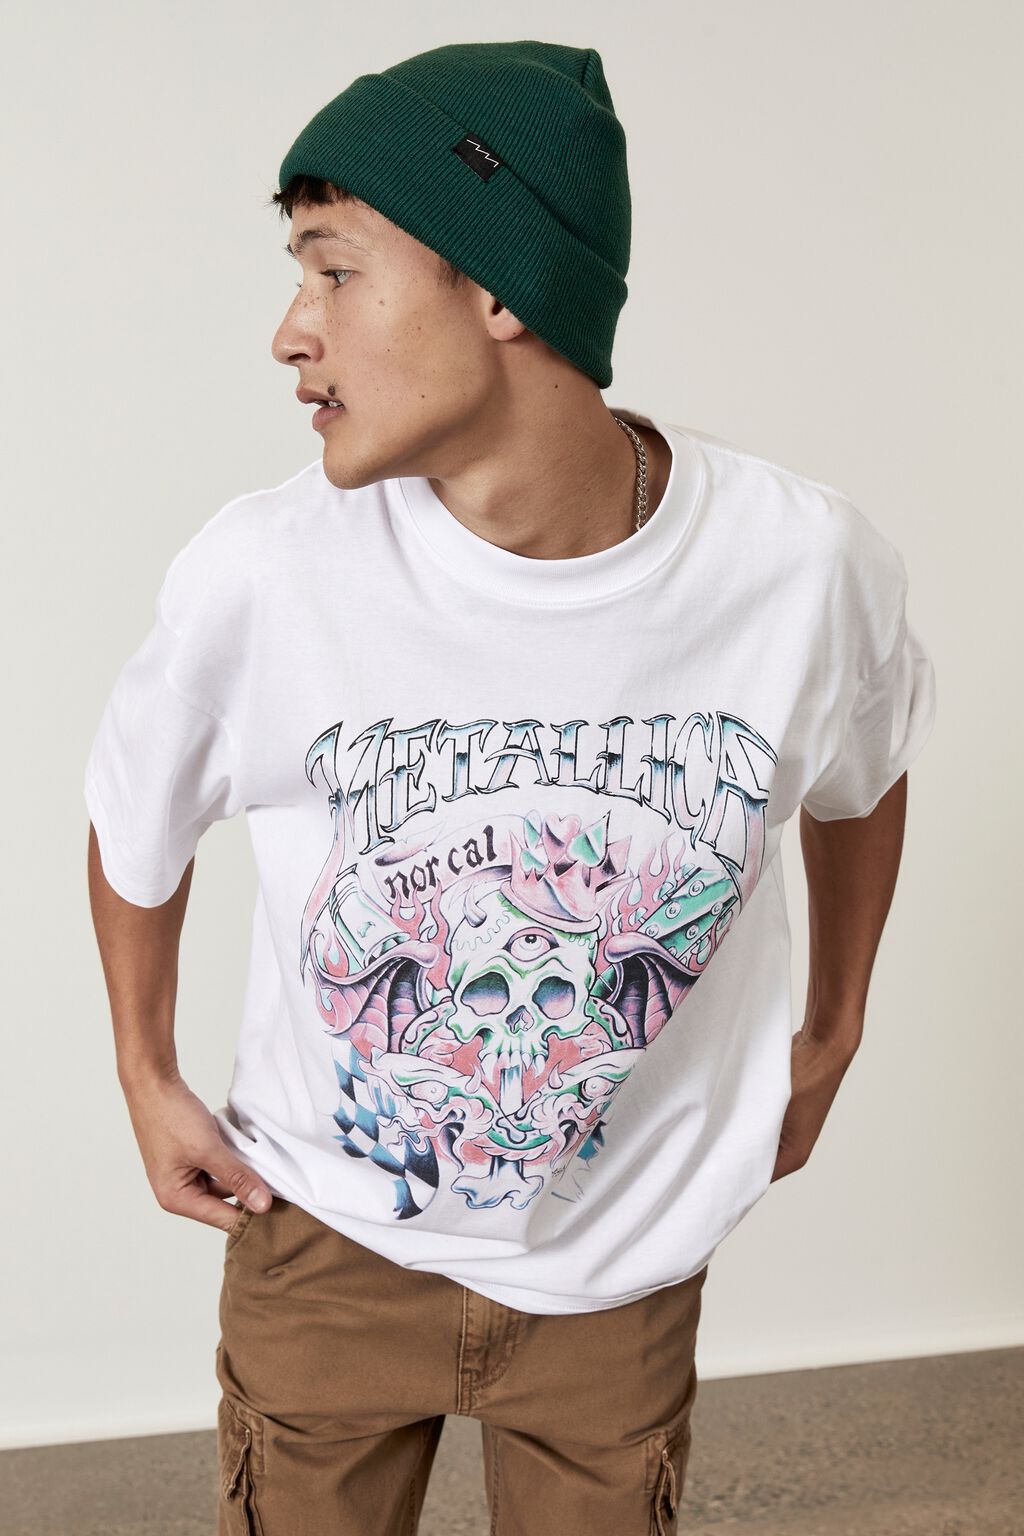 Mens Graphics | One stop destination for printed tees!